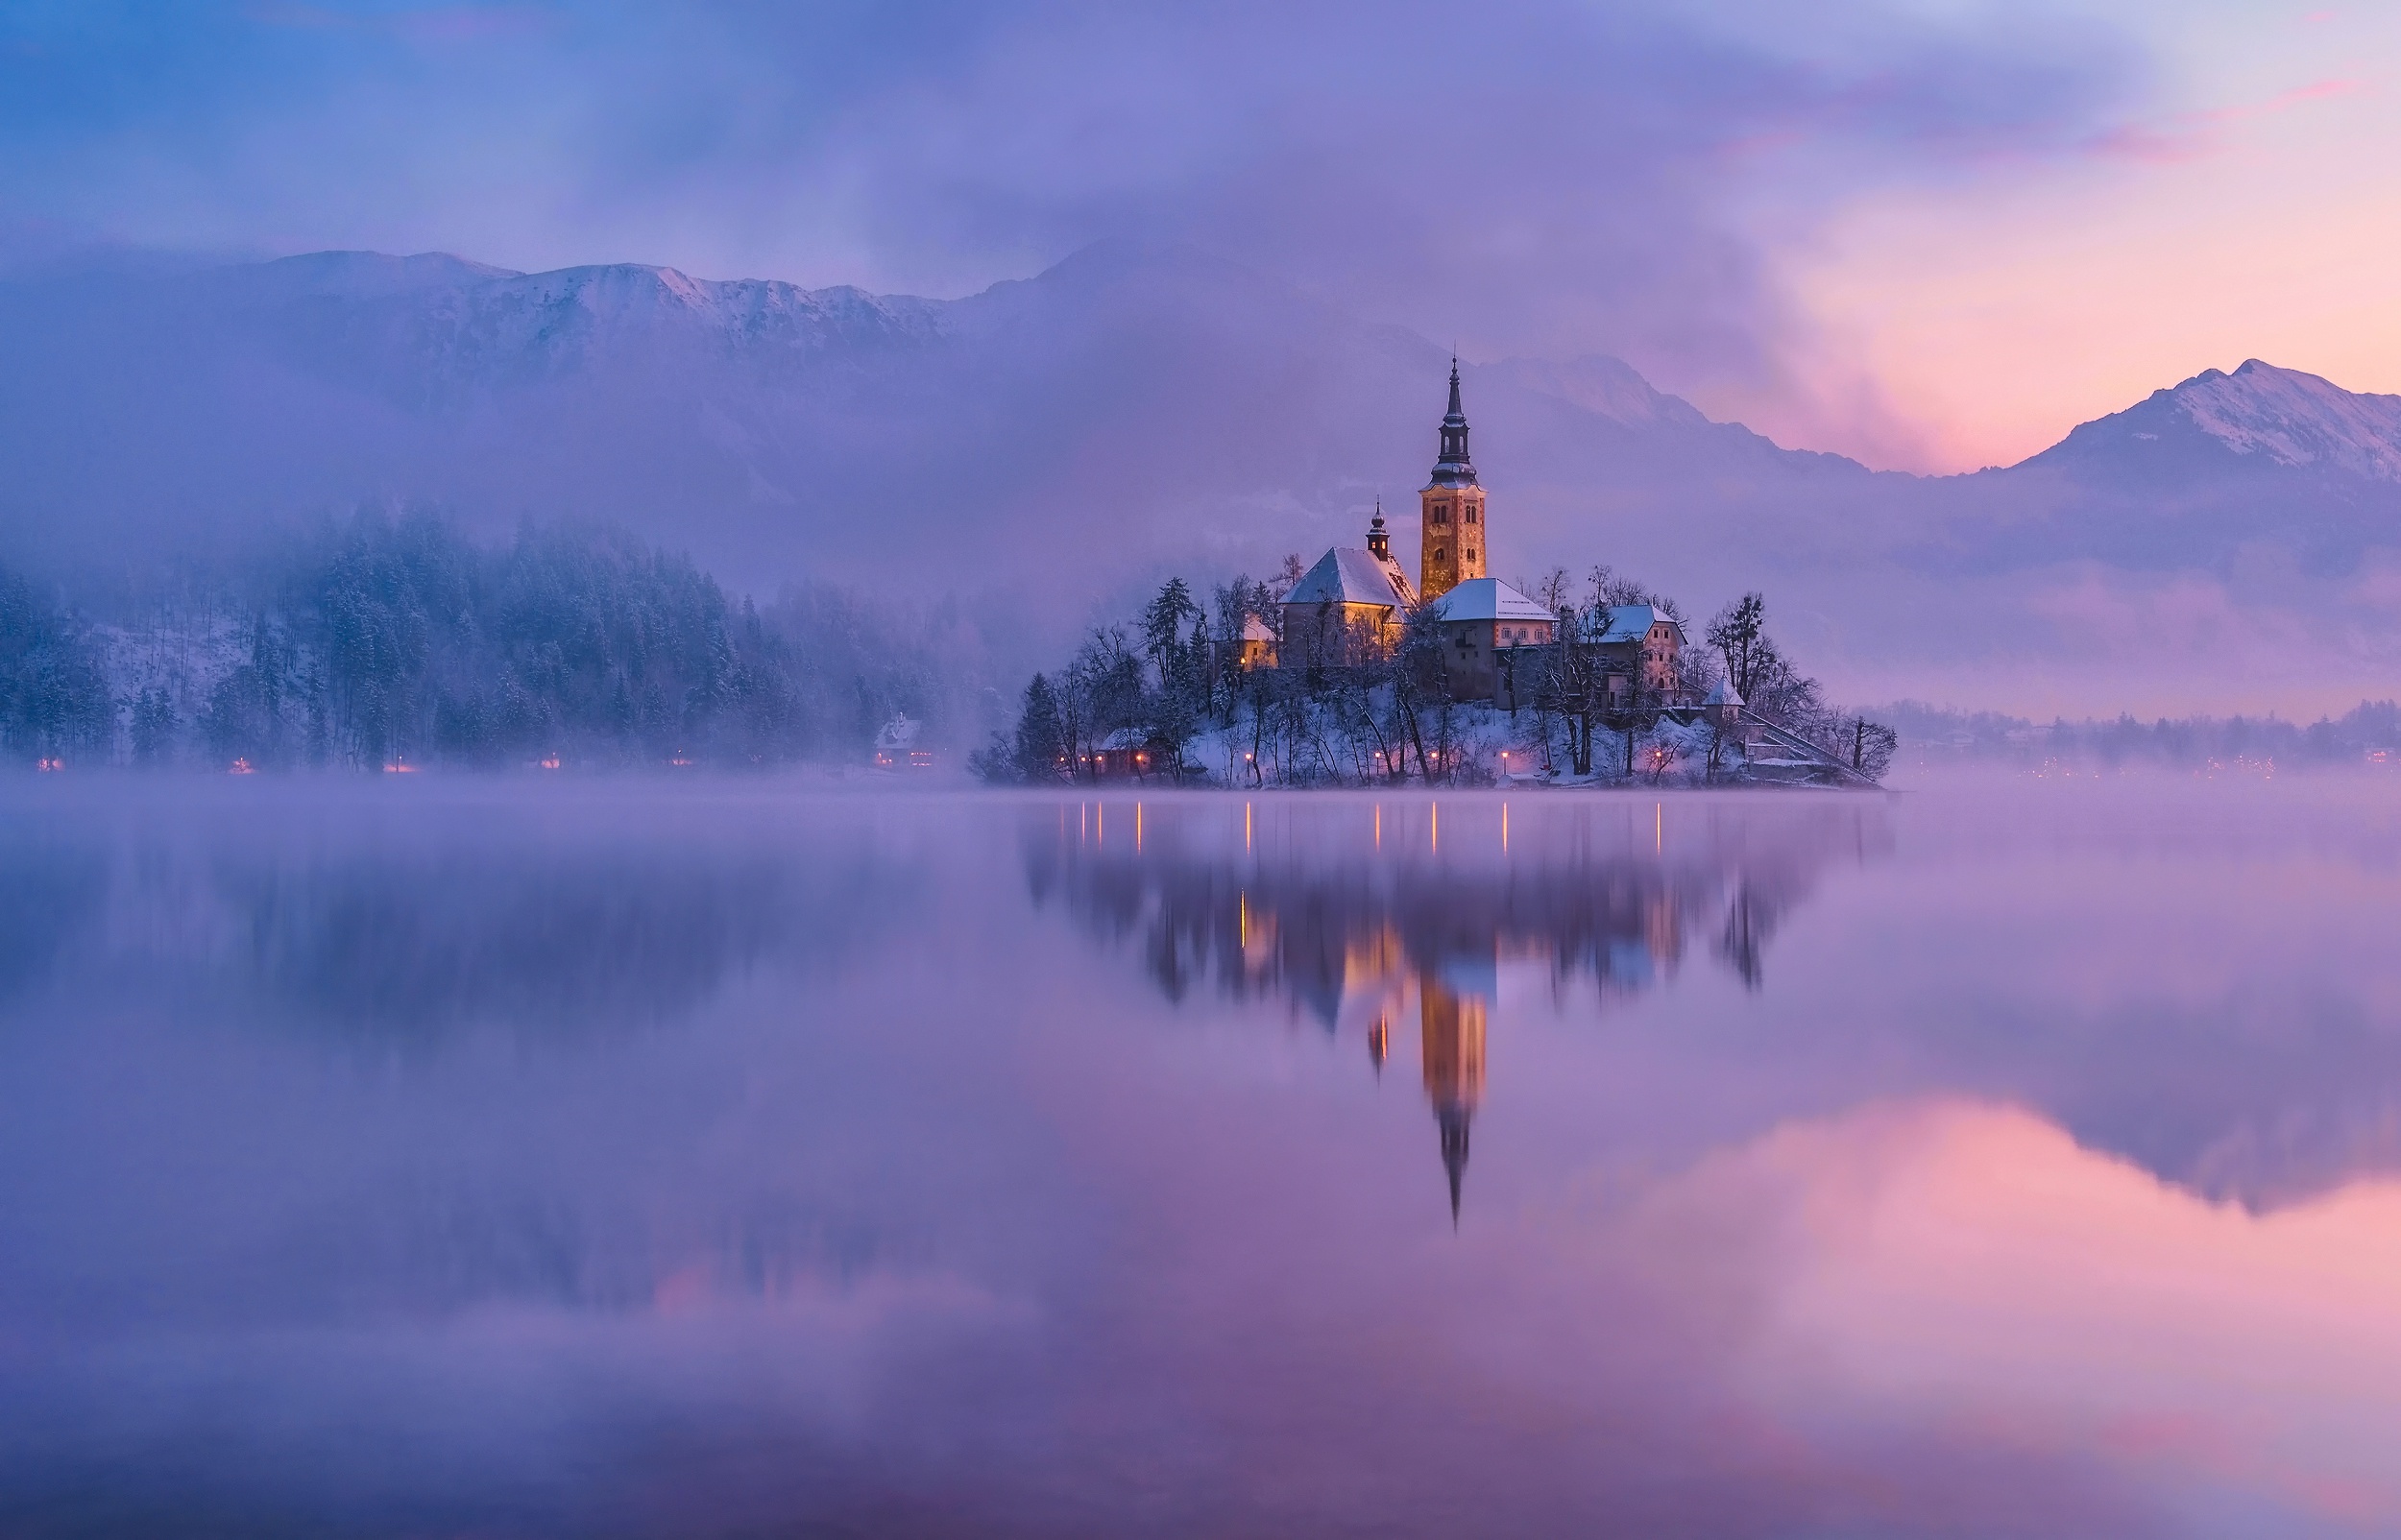 religious, assumption of mary church, lake bled, reflection, churches